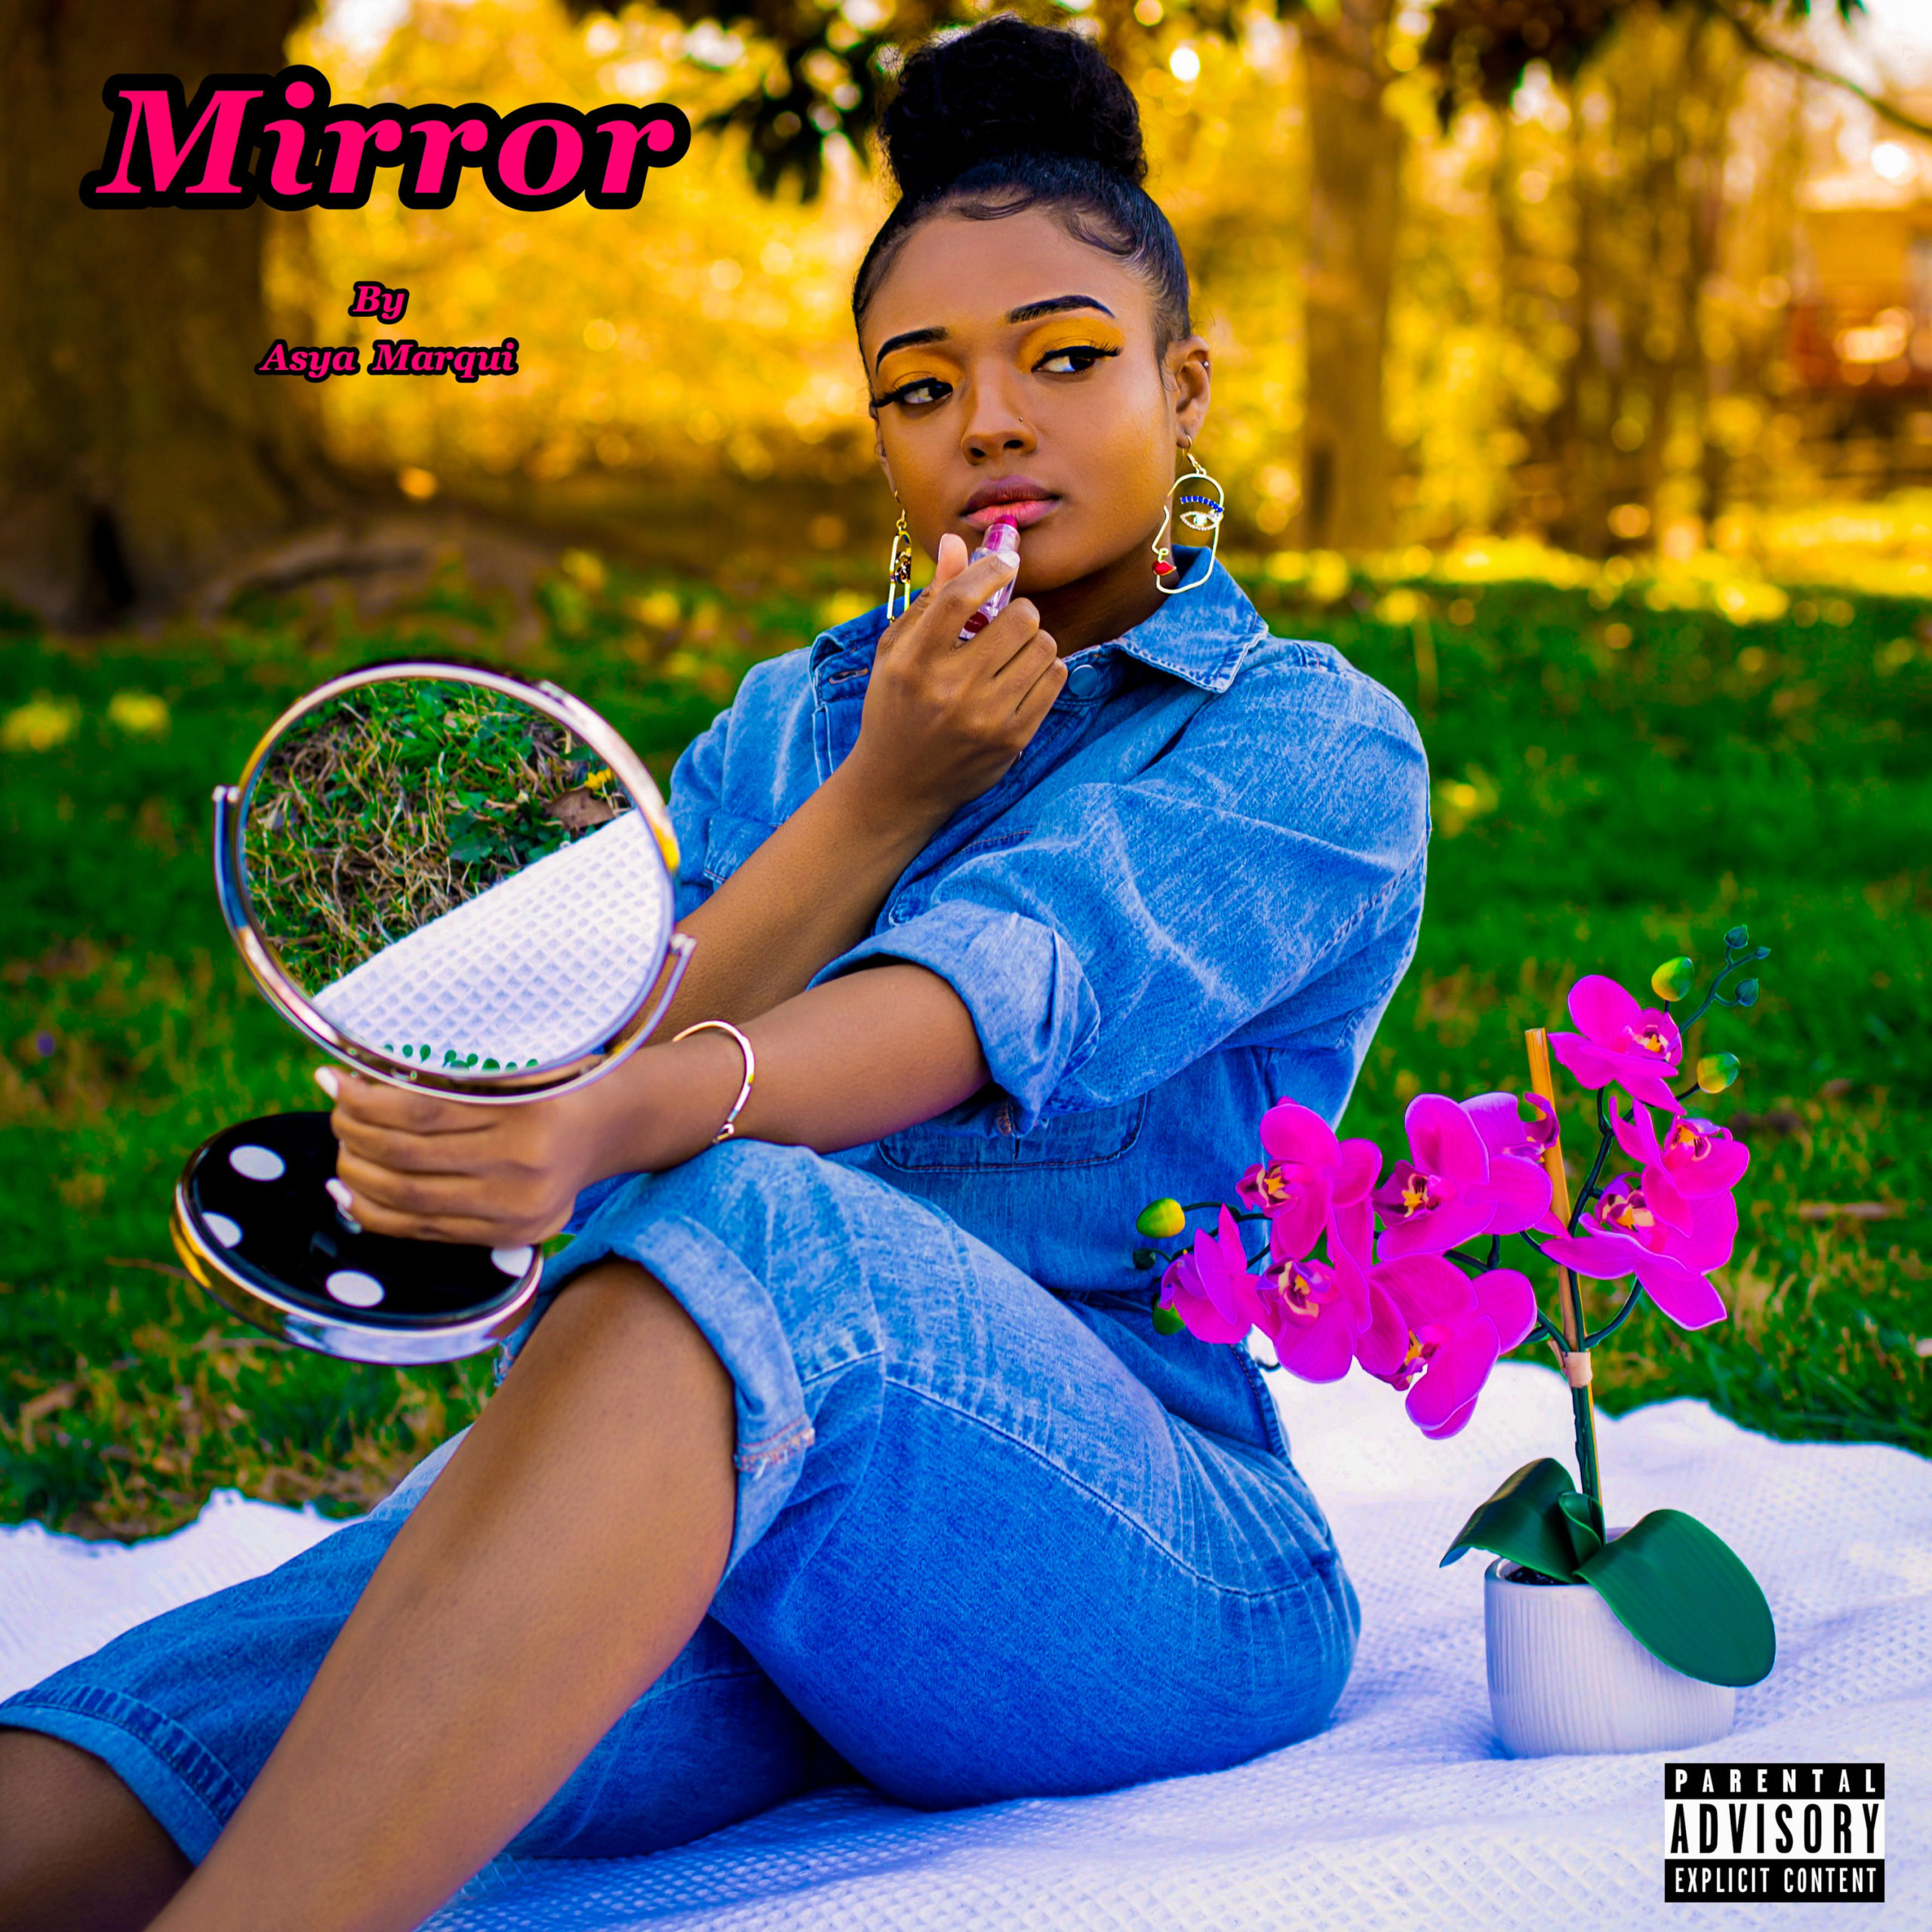 Asya Marqui’s desires are realized in new single “Mirror” @indgochld_